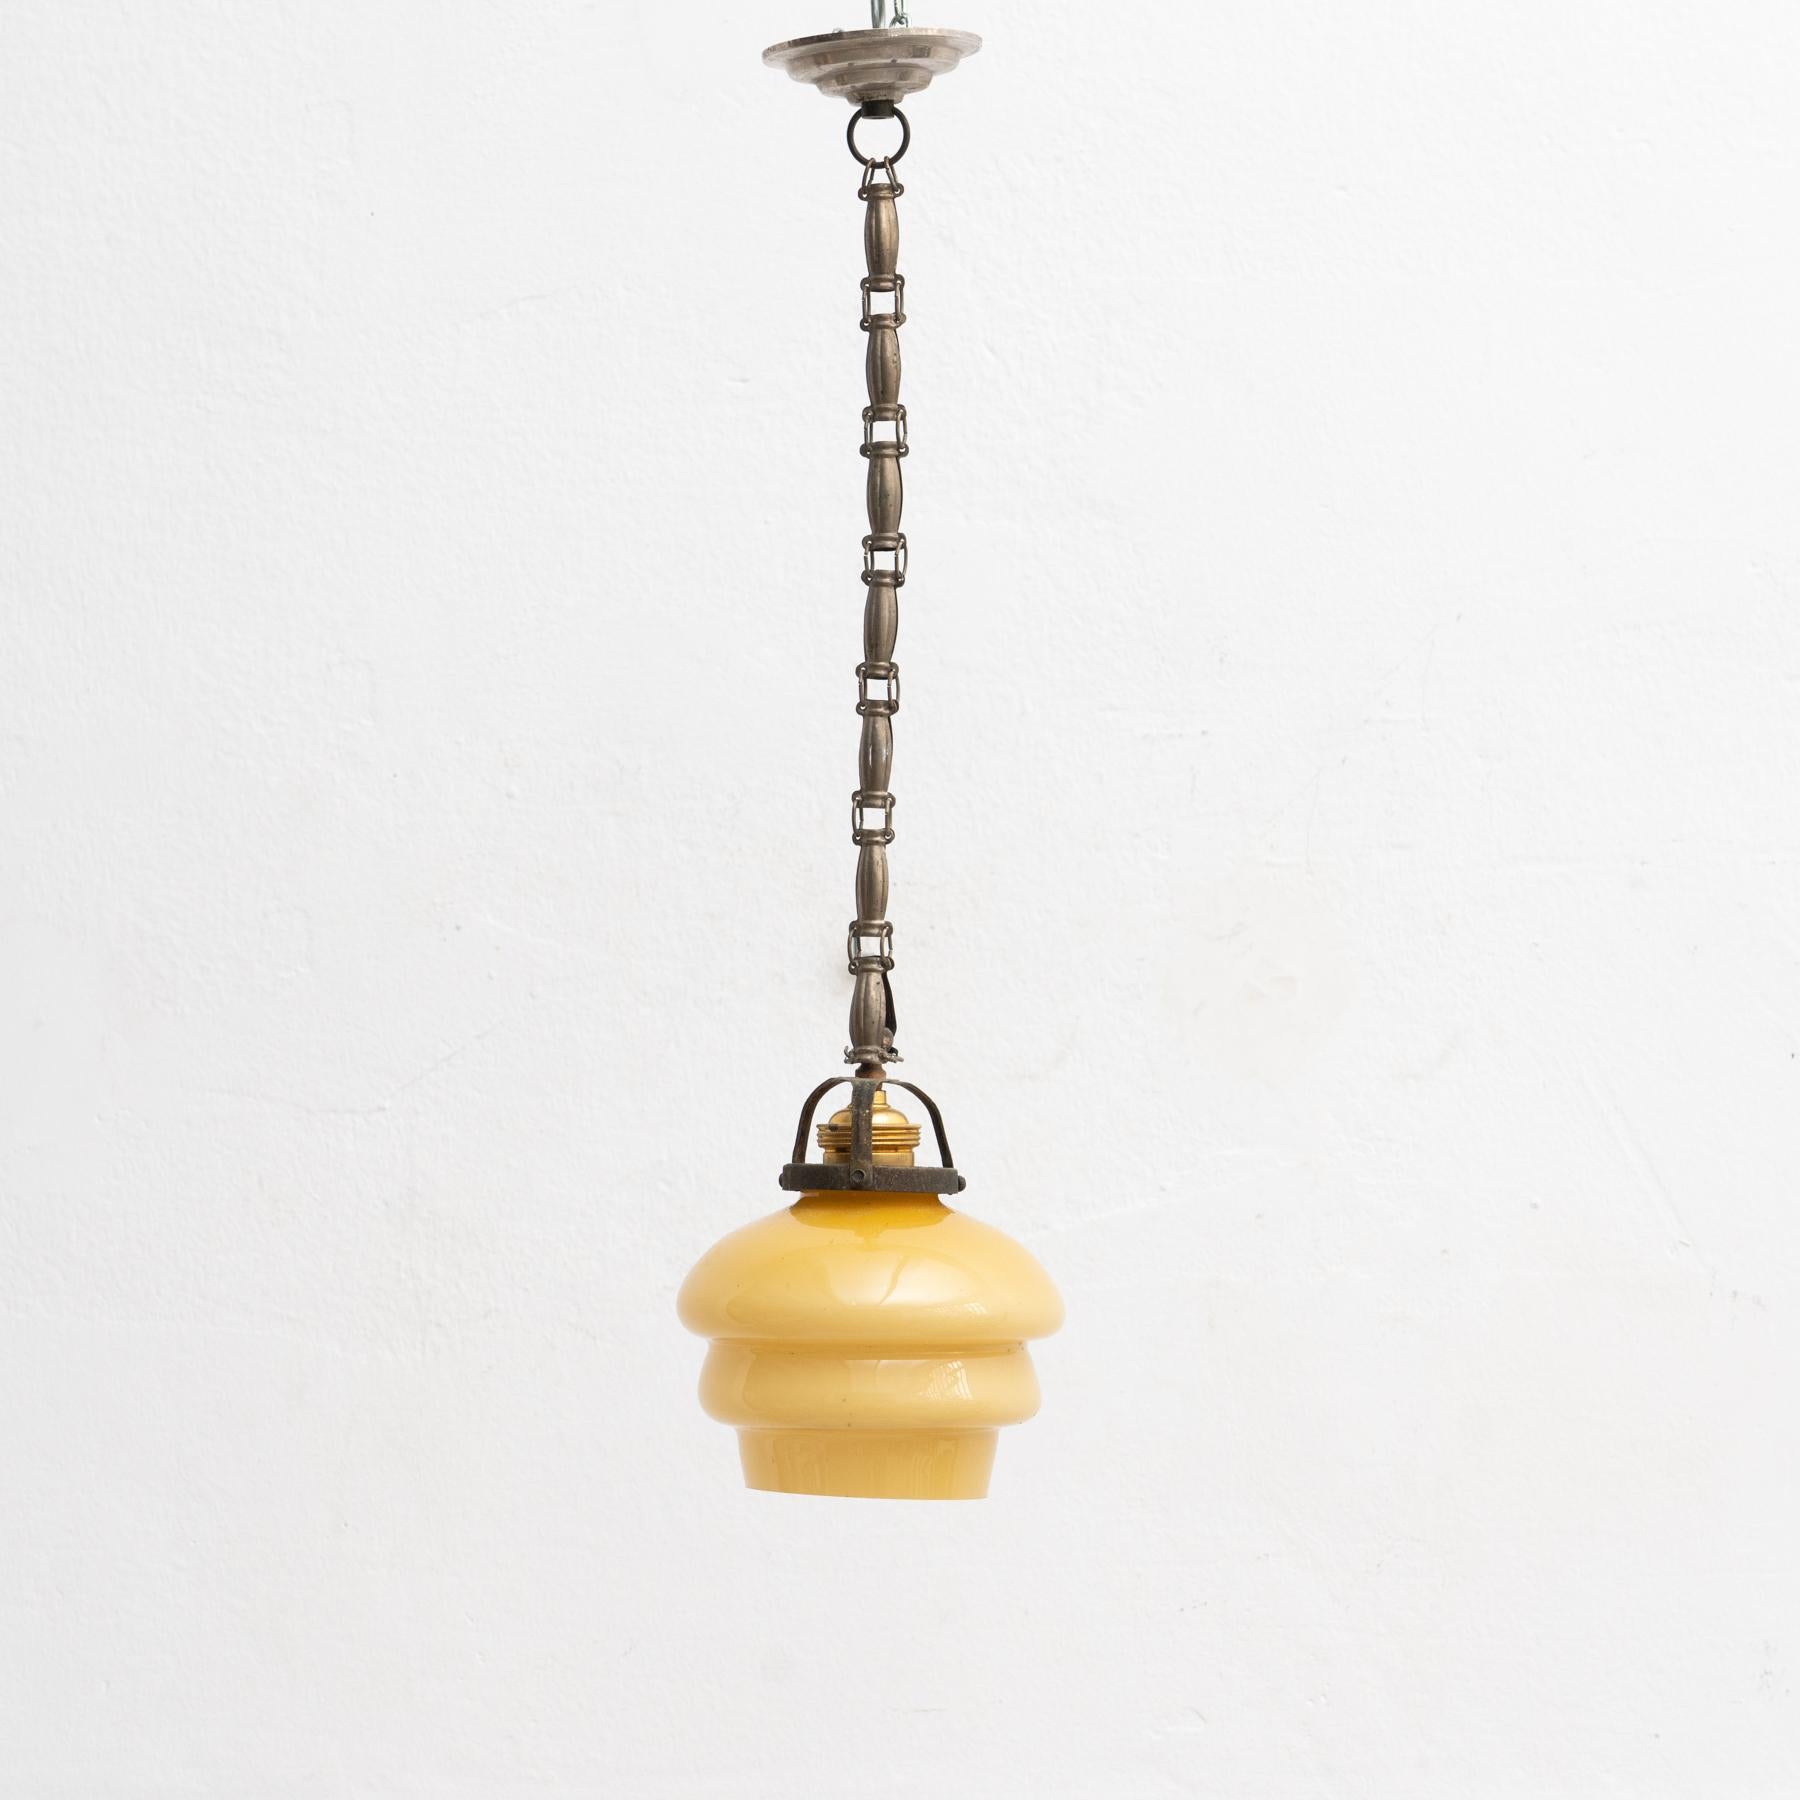 French vintage yellow glass ceiling lamp.

By unknown manufacturer from France, circa 1930.

In original condition, with minor wear consistent with age and use, preserving a beautiful patina.

Materials:
Glass
Metal.
    